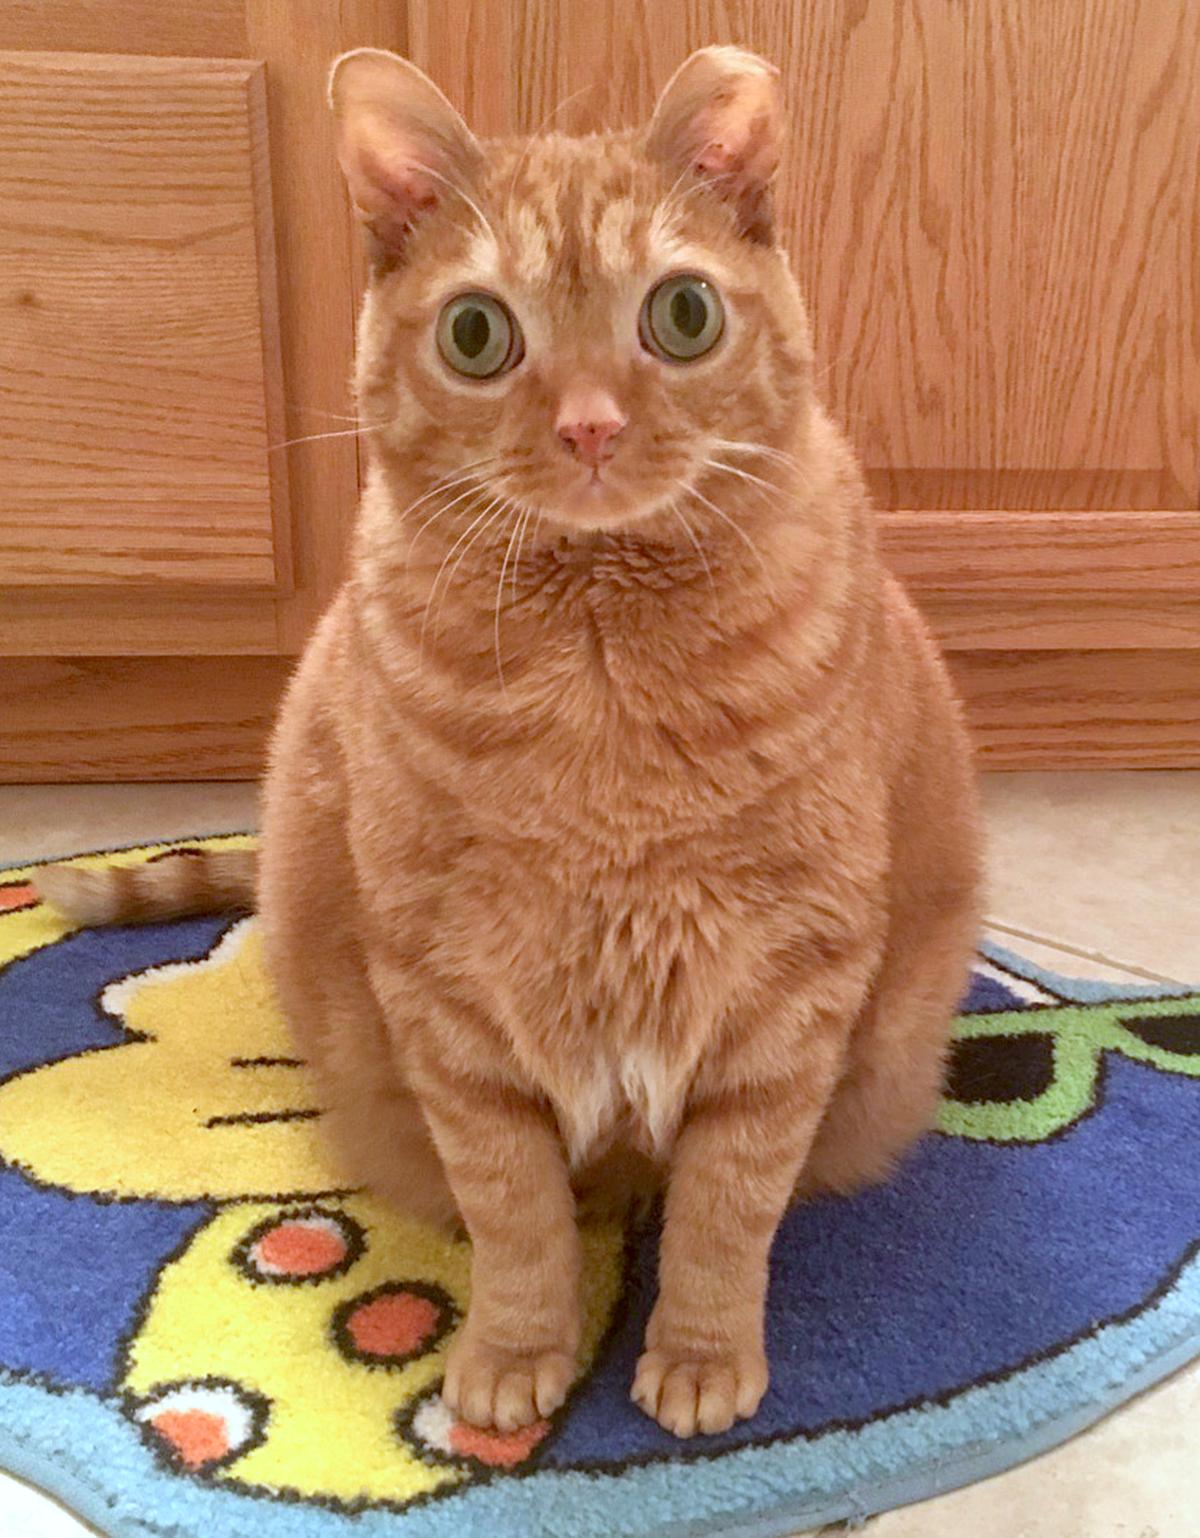 A 5-year-old cat has become an Instagram star for his bulging eyes. (Caters News)